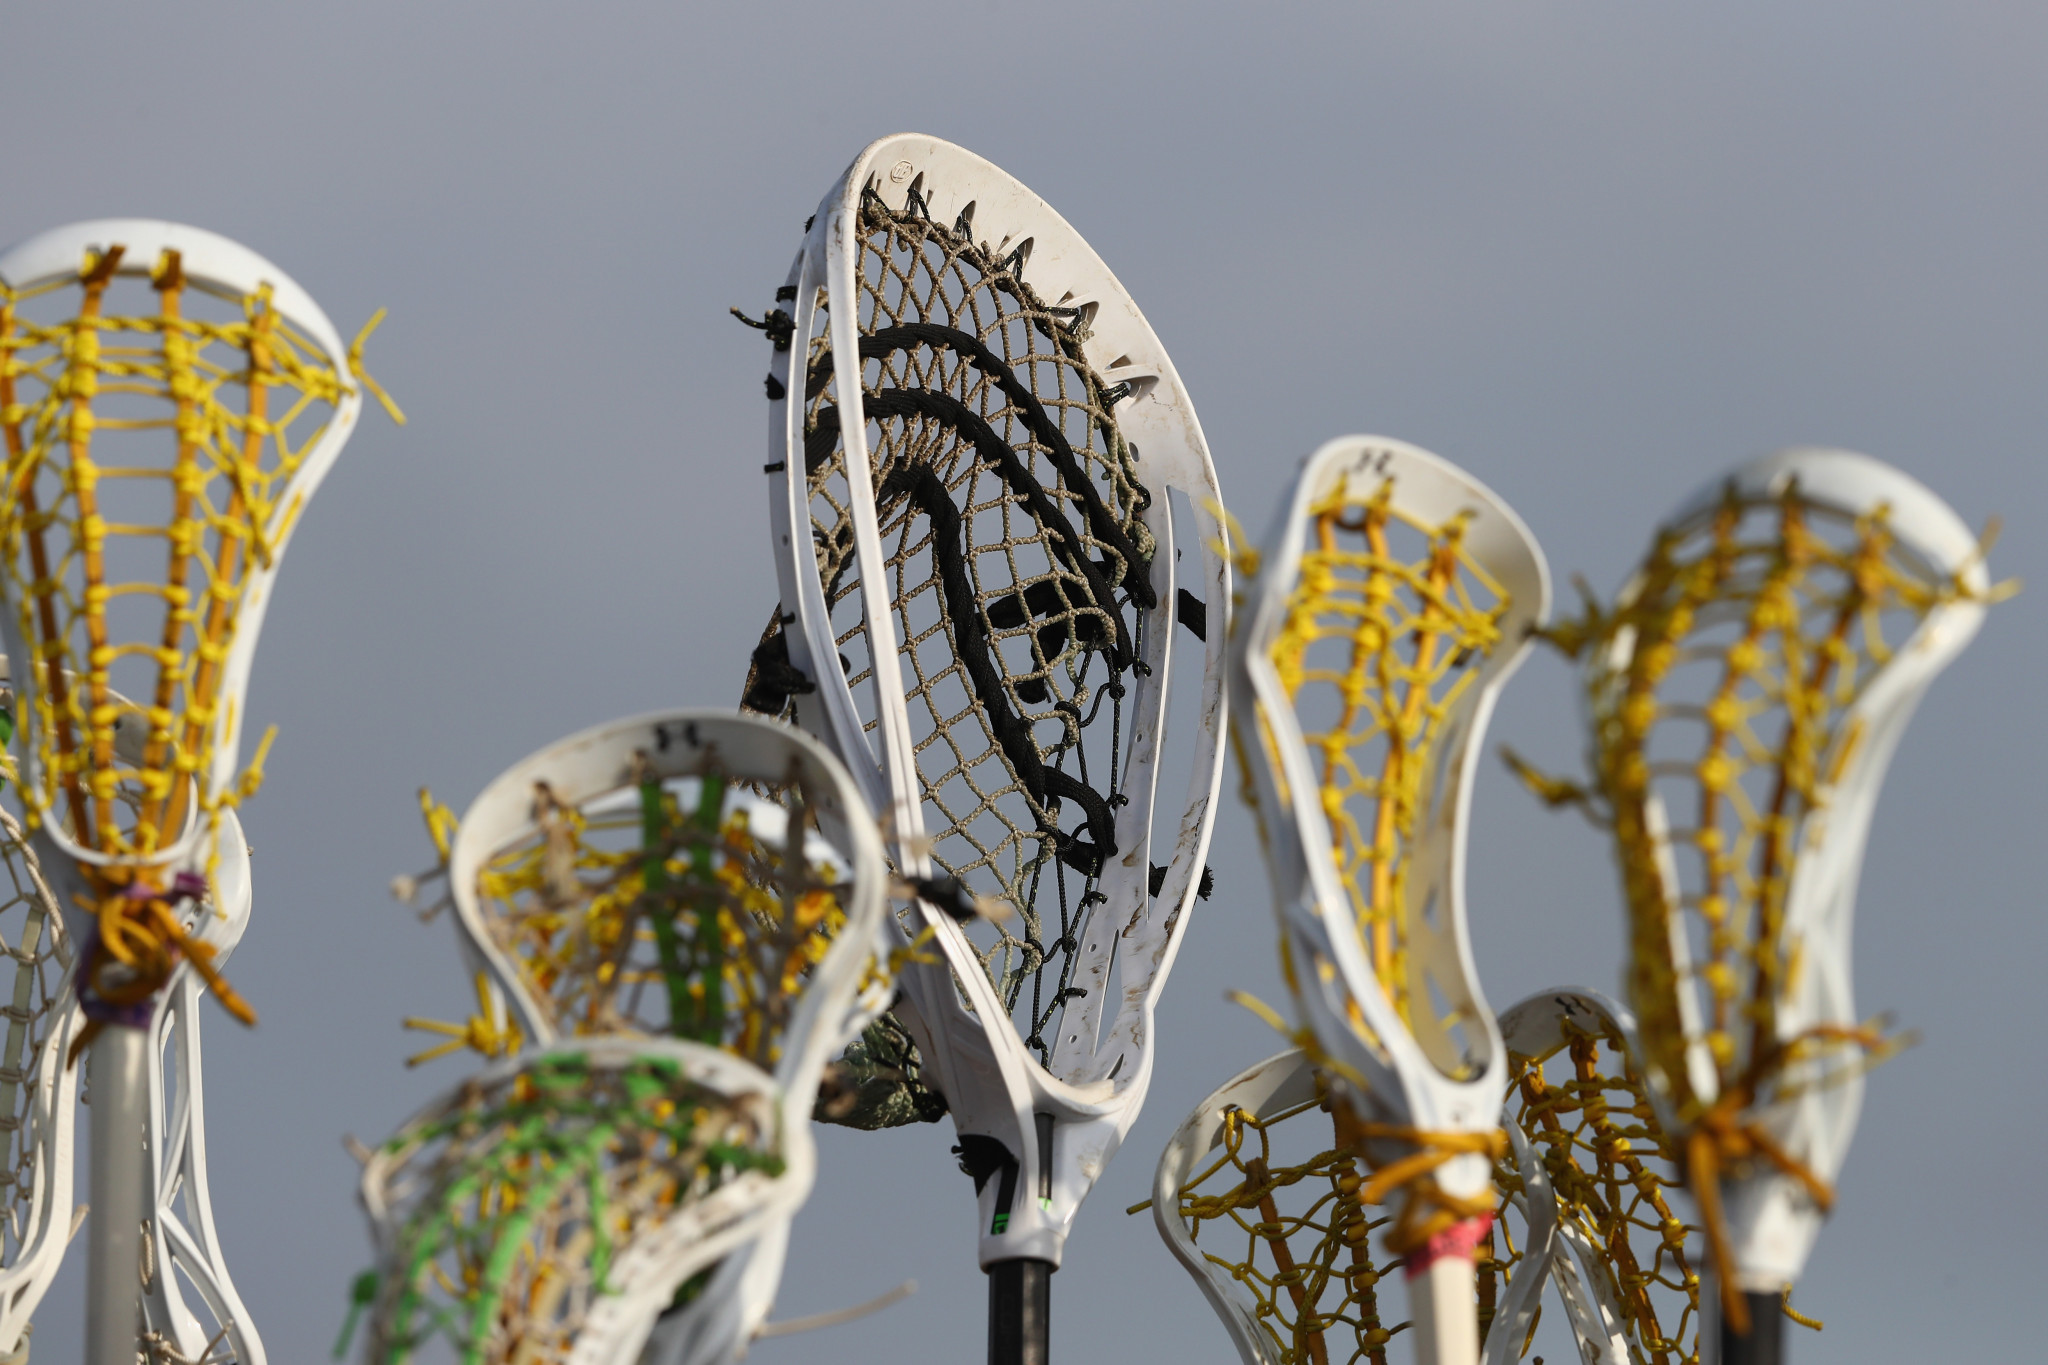 Record 23 lacrosse teams to play at Men's Under-21 World Championship